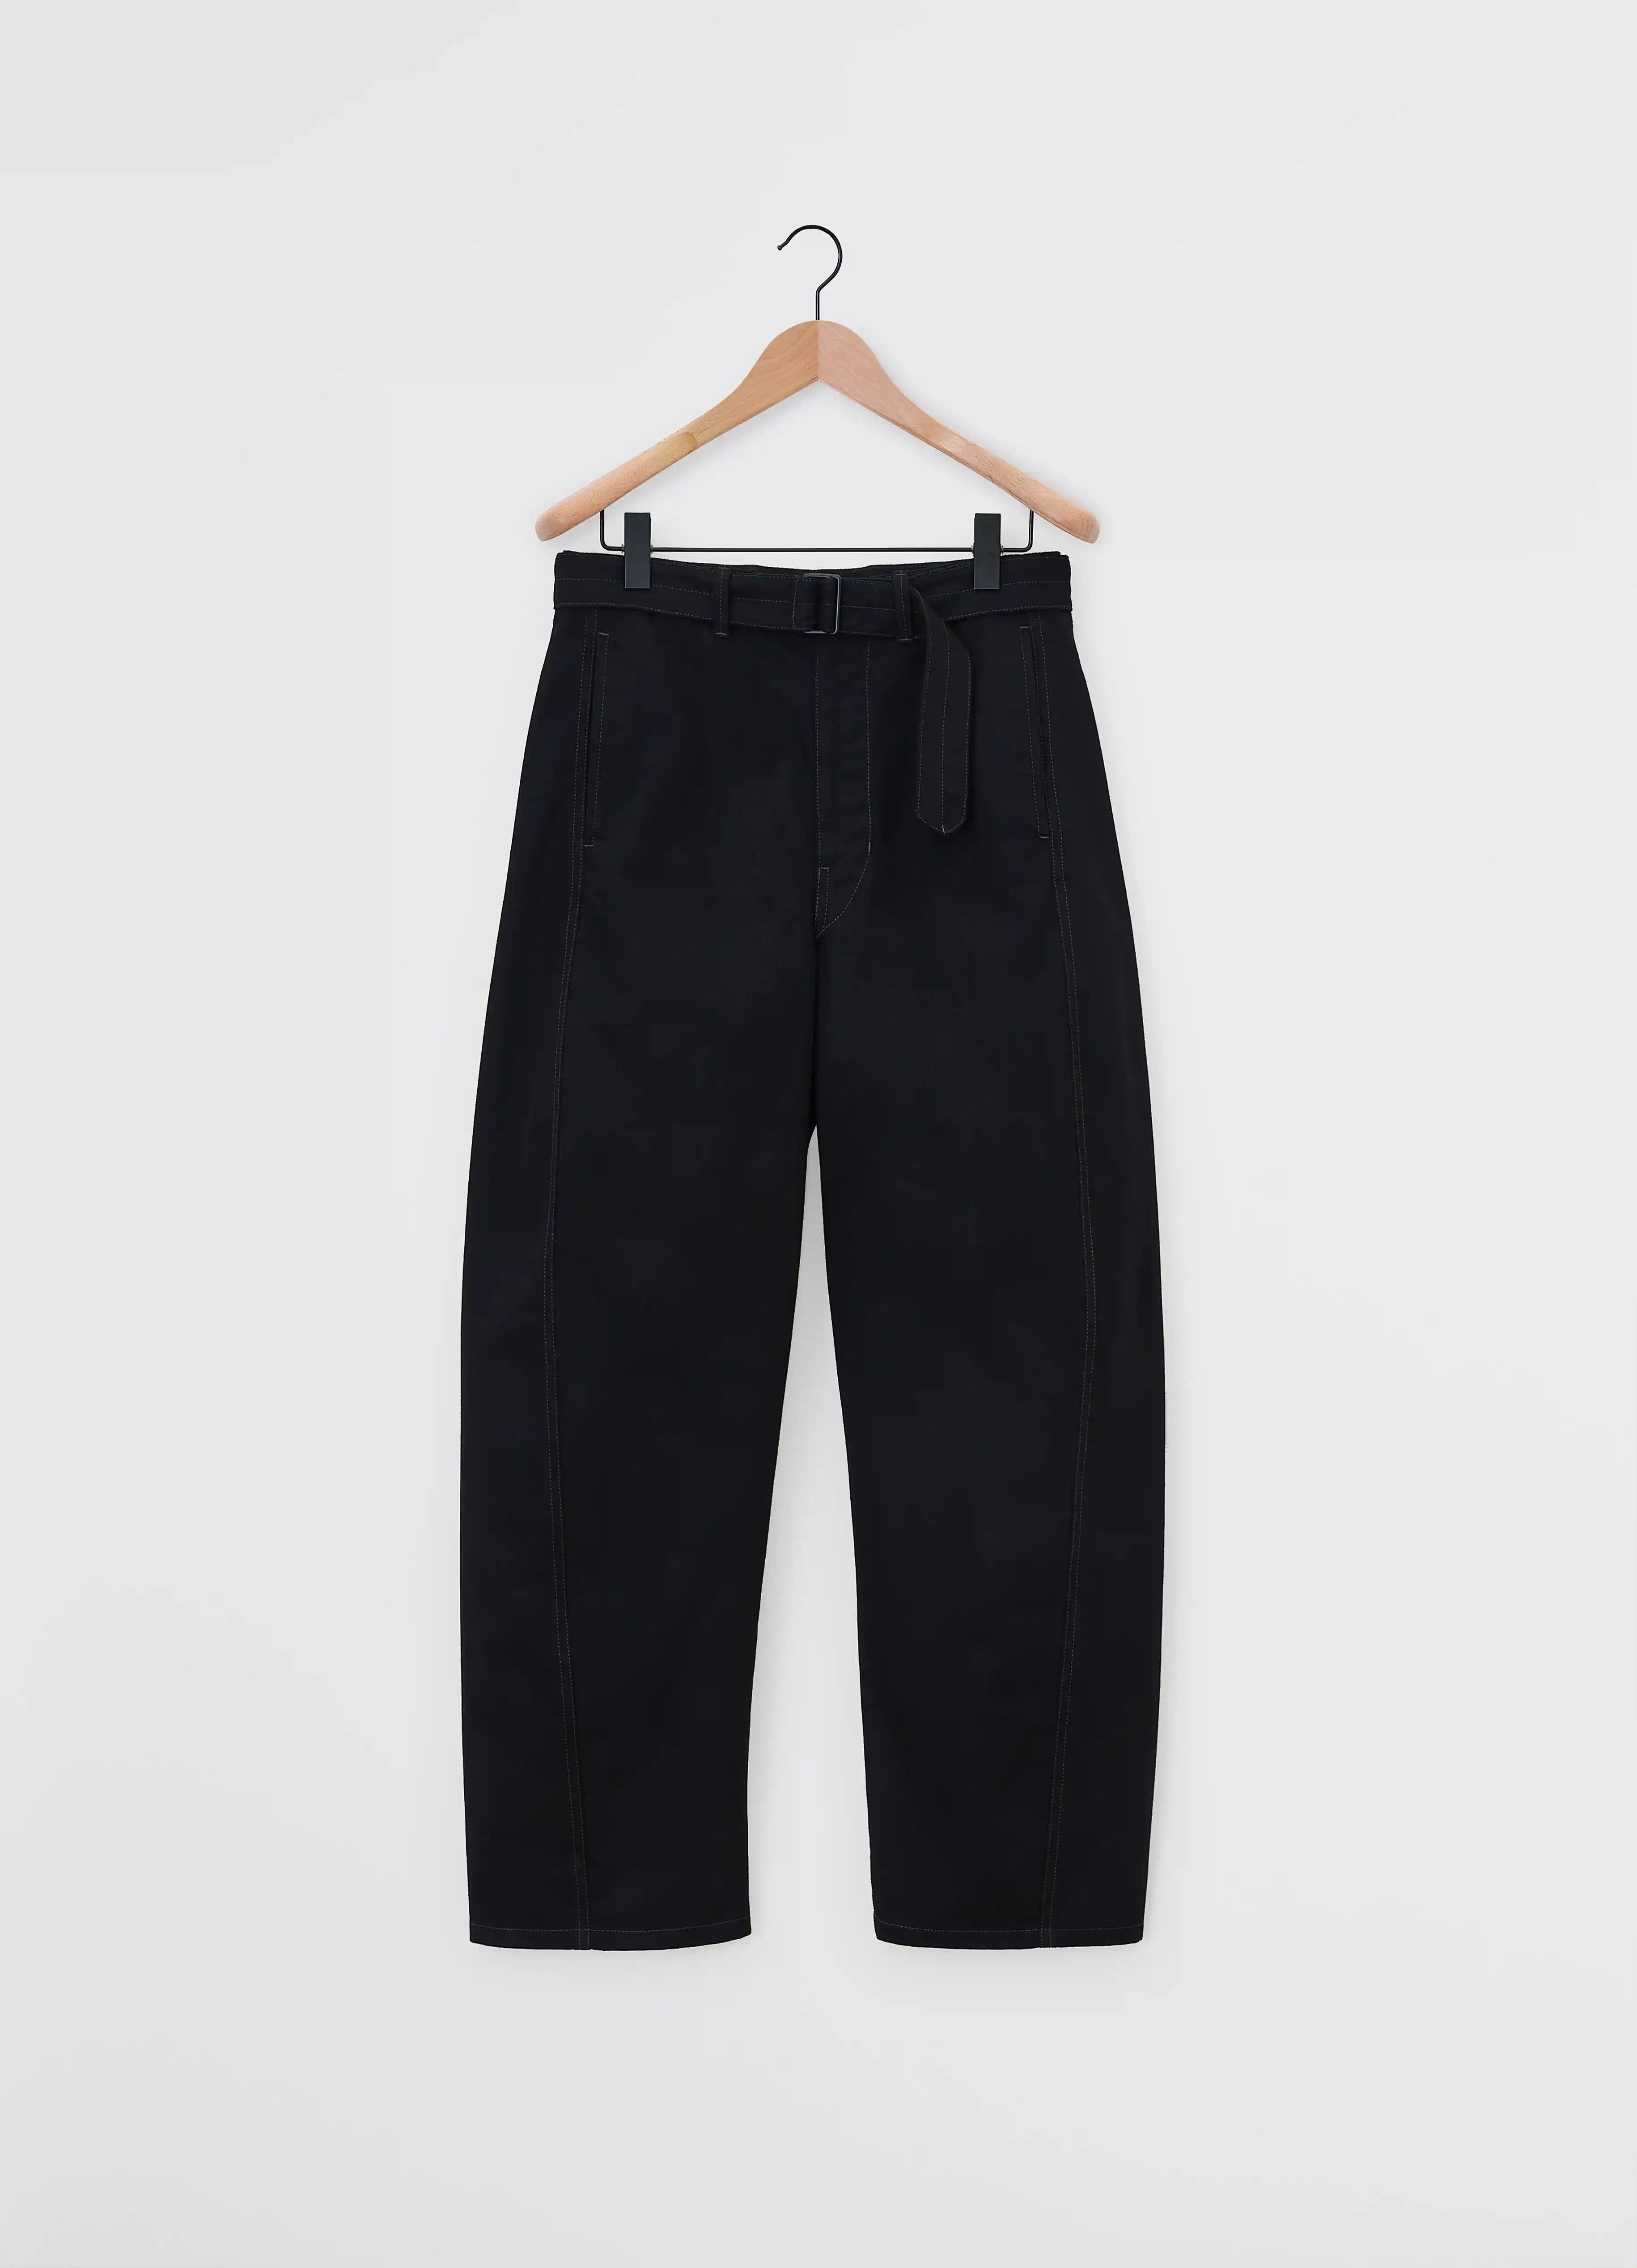 BLACK Twisted belted pants | LEMAIRE